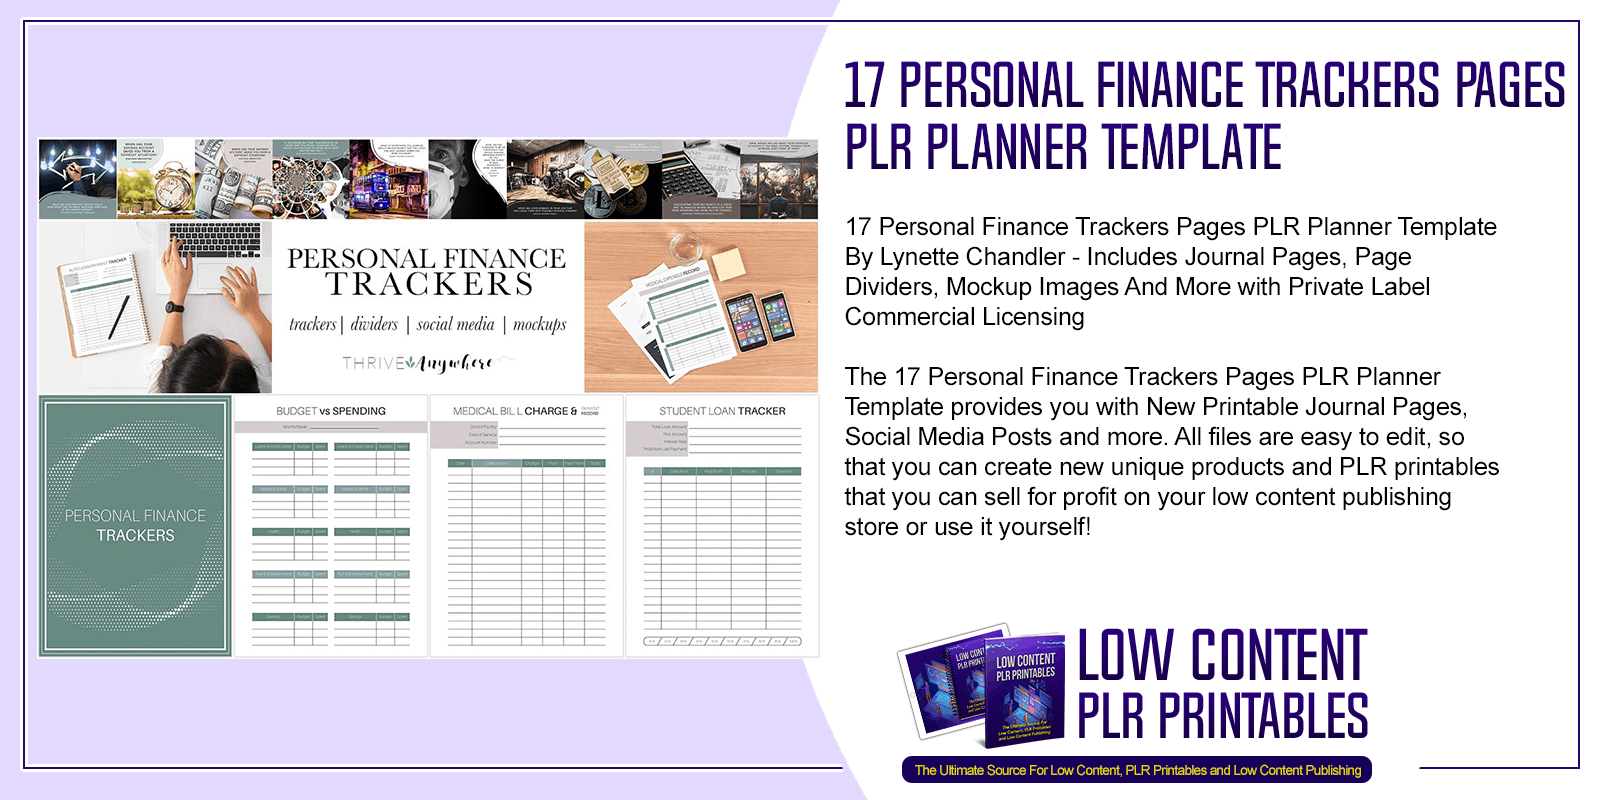 22 Personal Finance Trackers Pages PLR Planner Template  PLR Planner Intended For Label Template For Pages